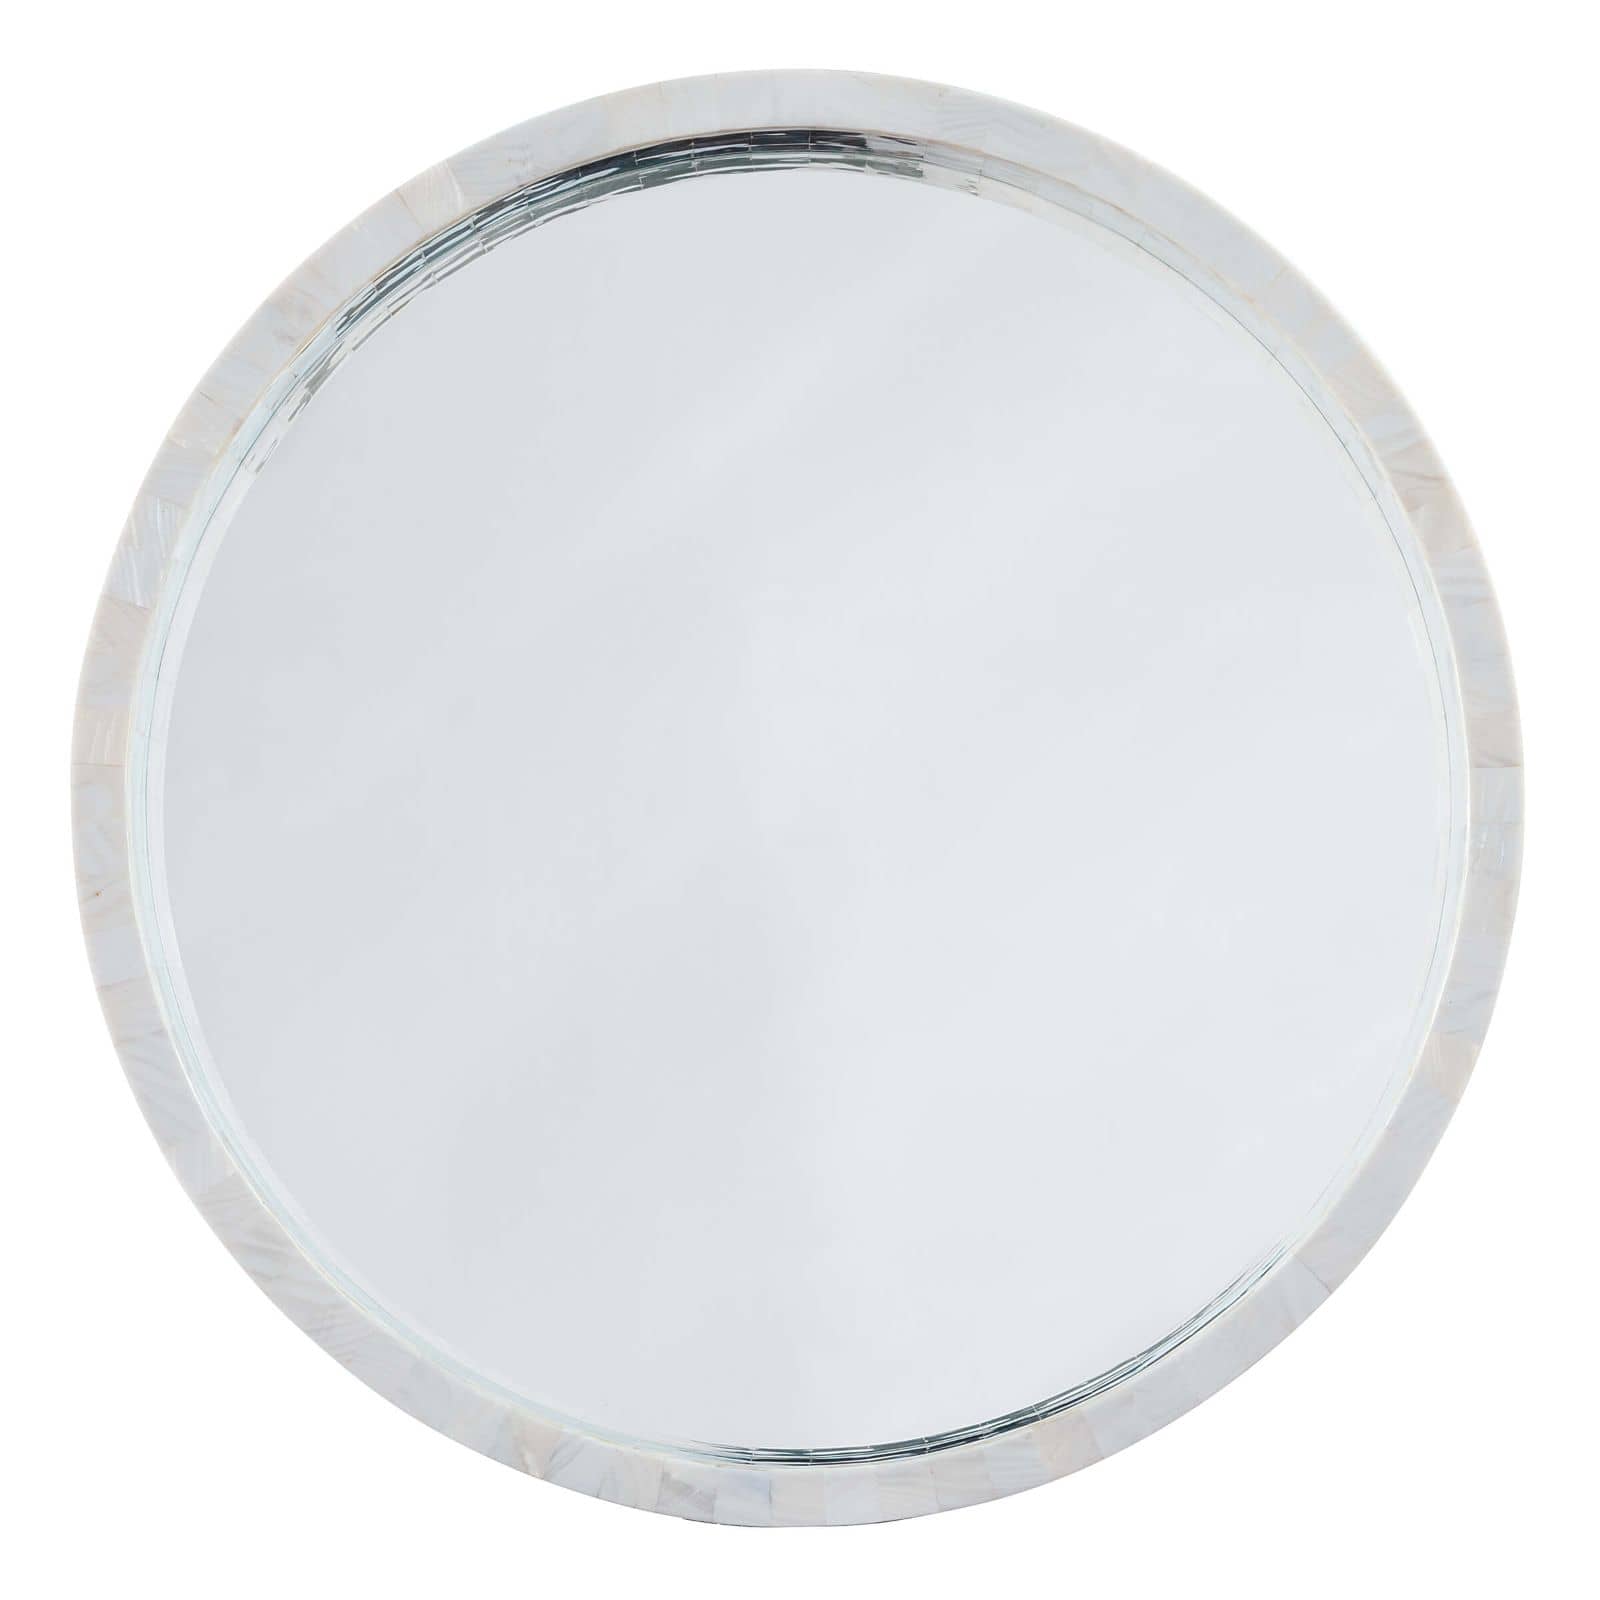 Mother of Pearl Mirror Large - Decor - Tipplergoods